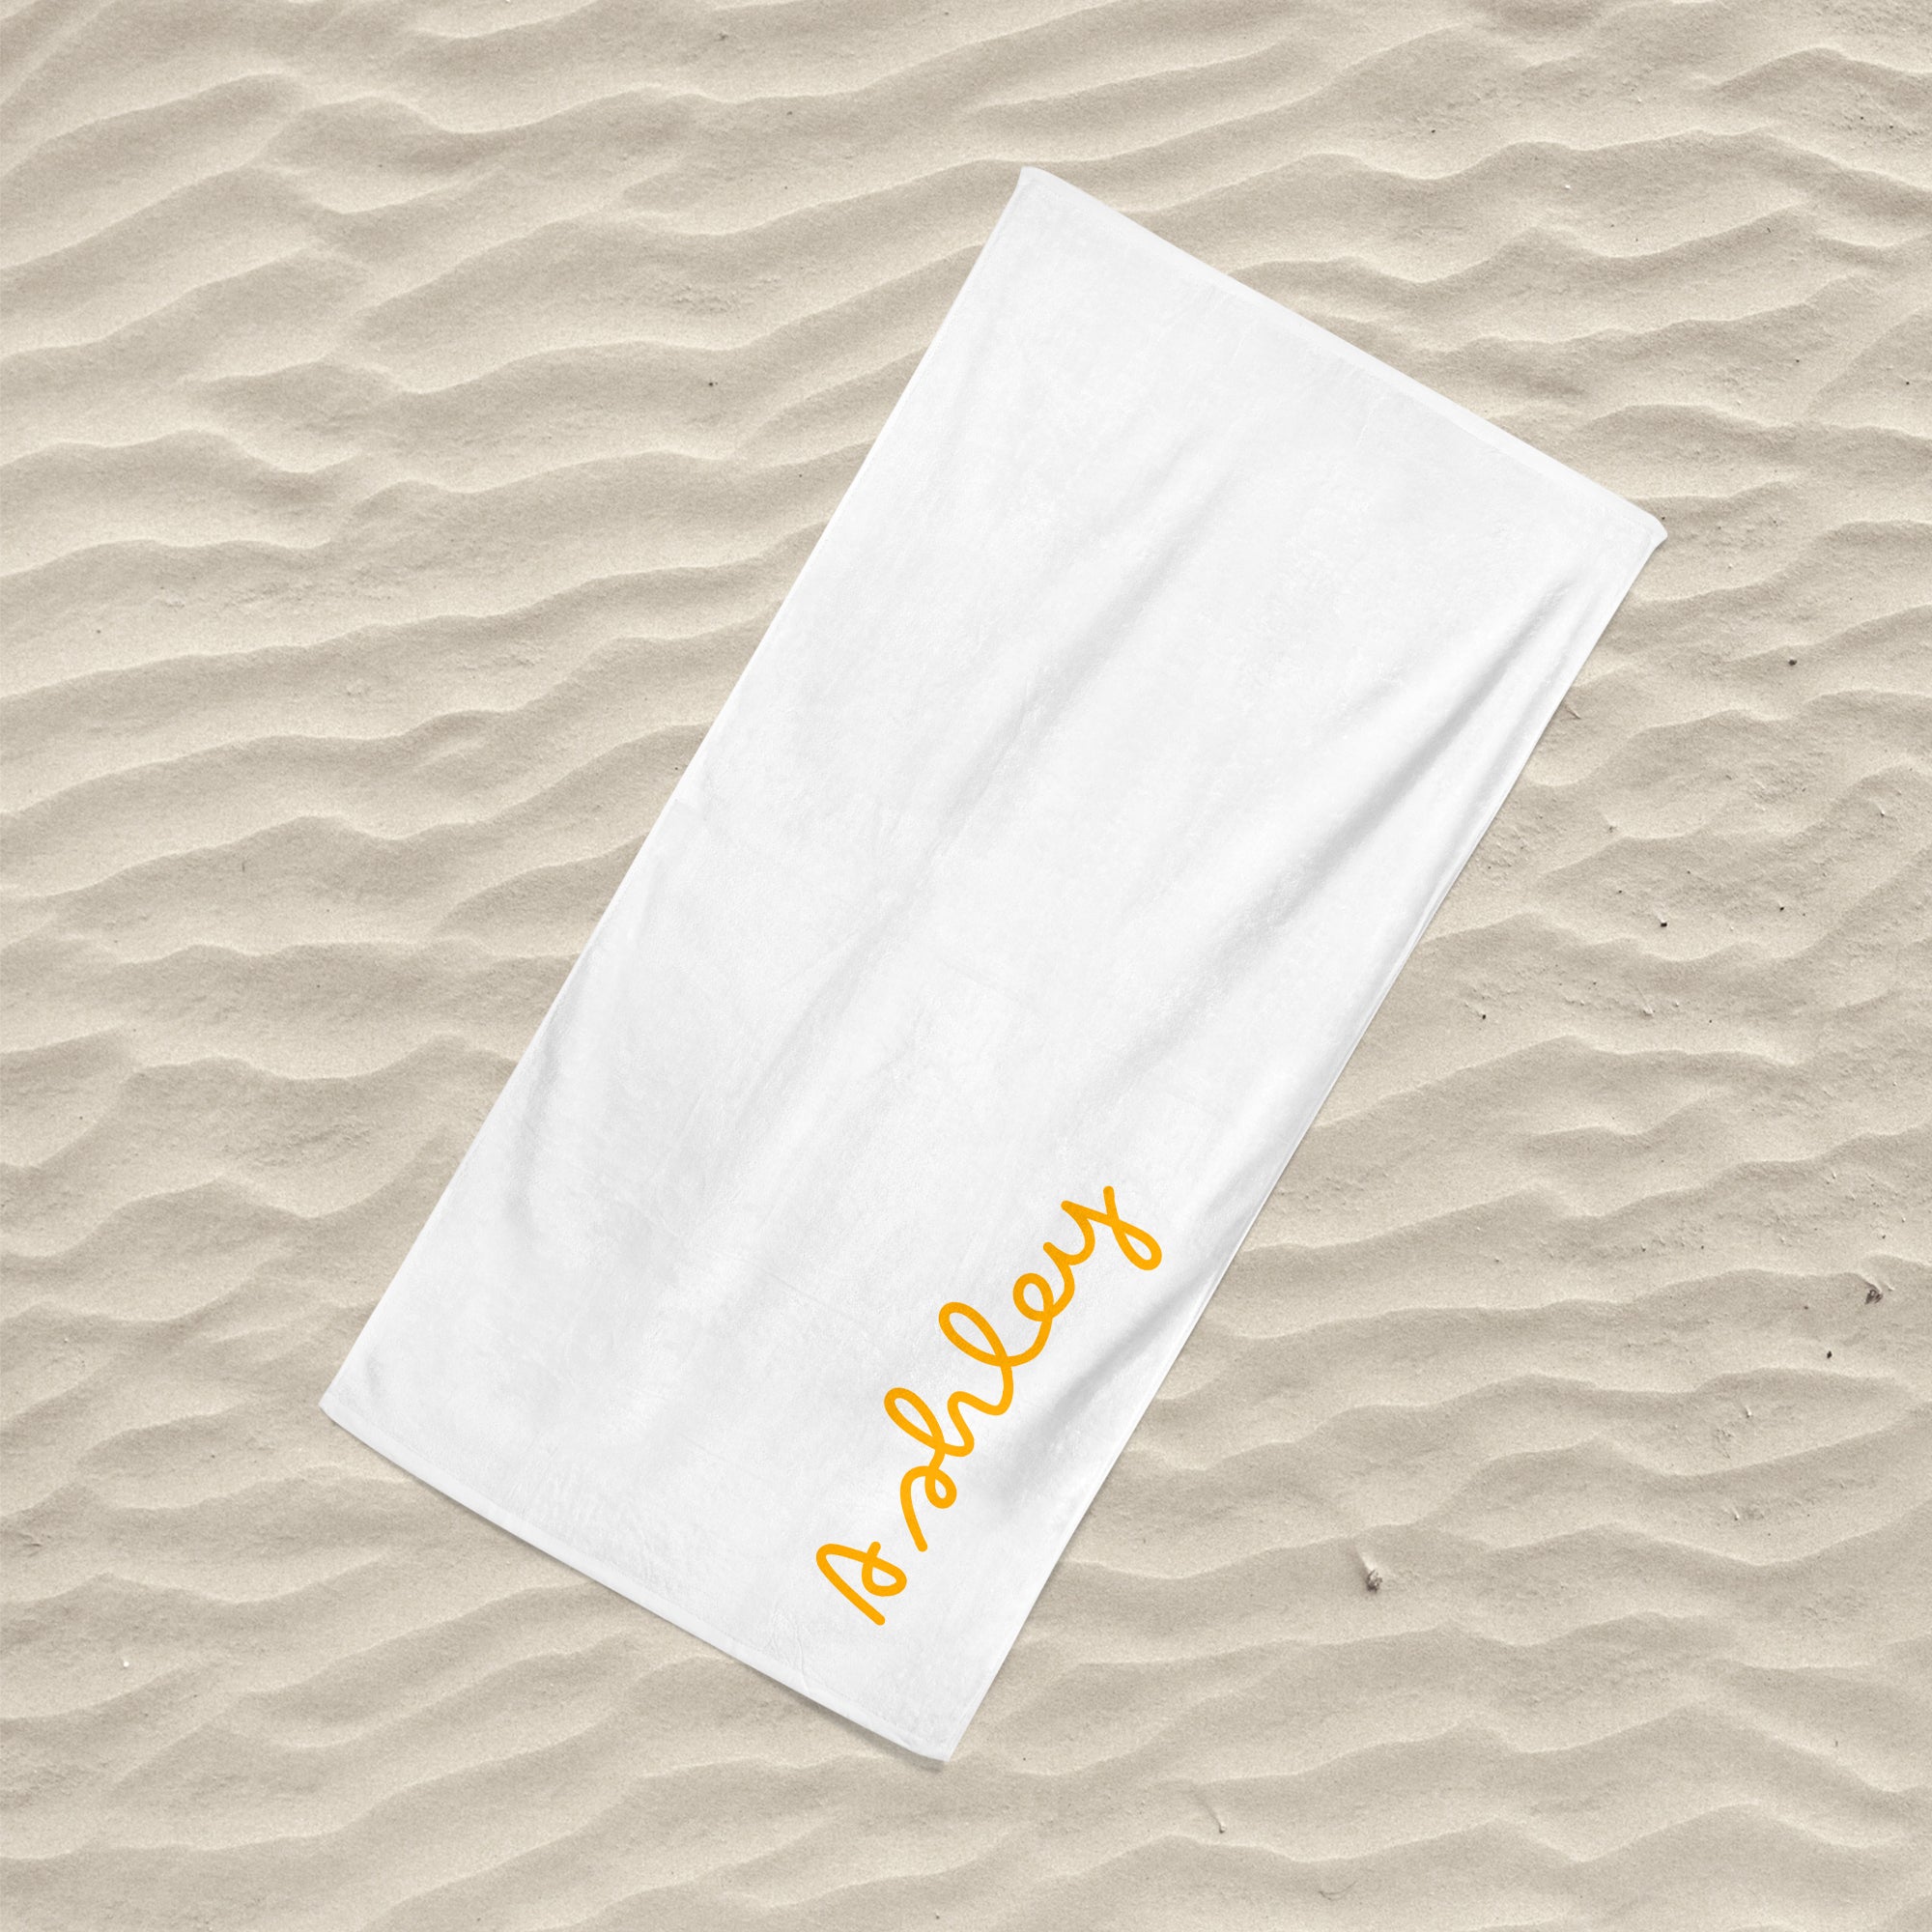 Island Inspired Beach Towel Orange on White - Personalise with Name